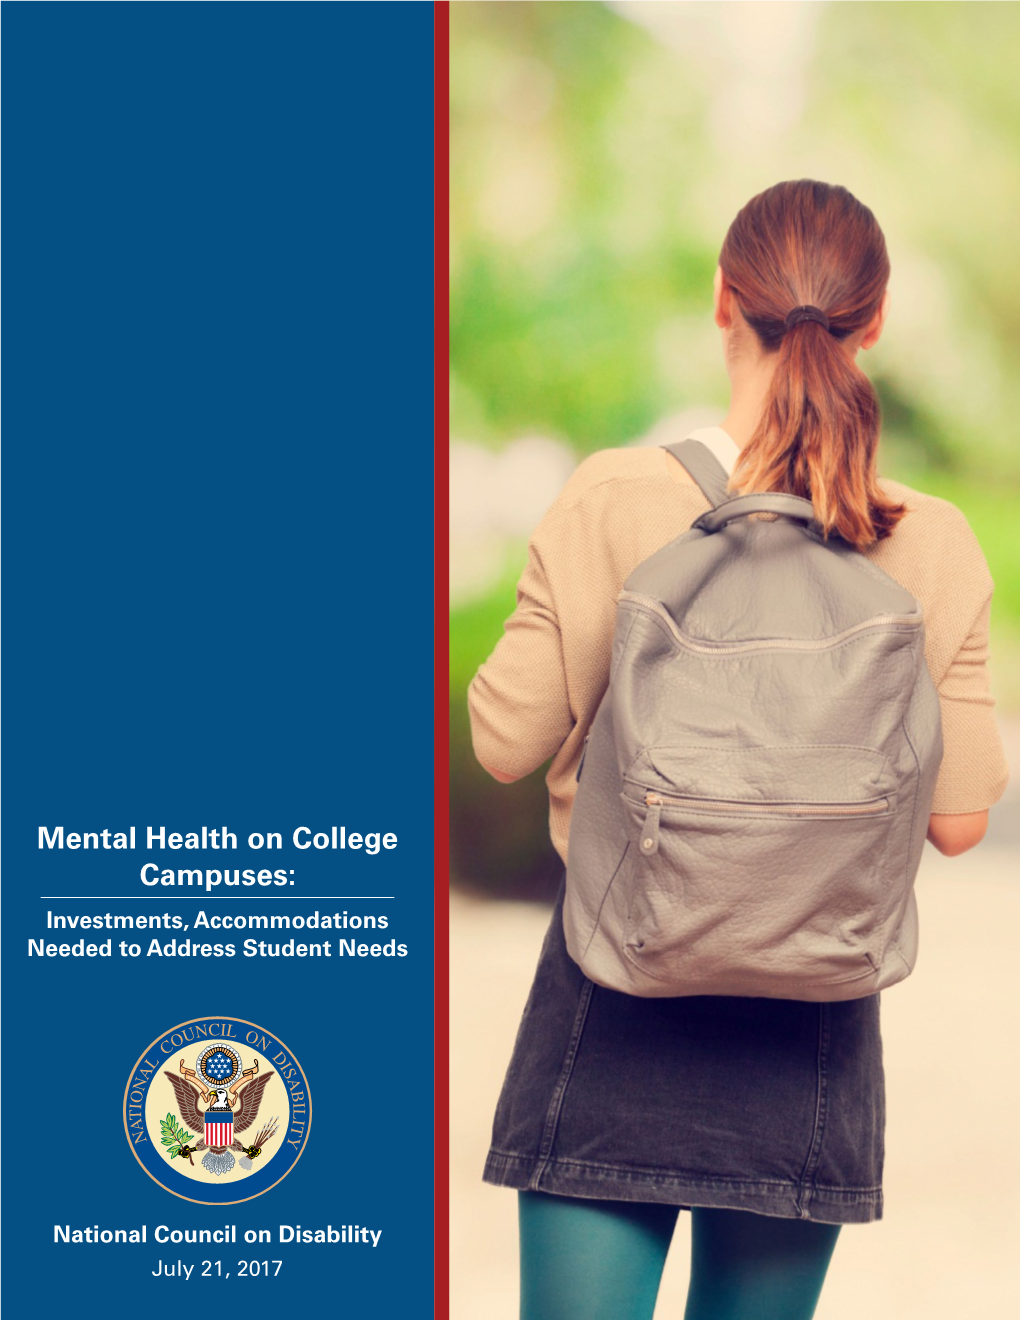 Mental Health on College Campuses: Investments, Accommodations Needed to Address Student Needs